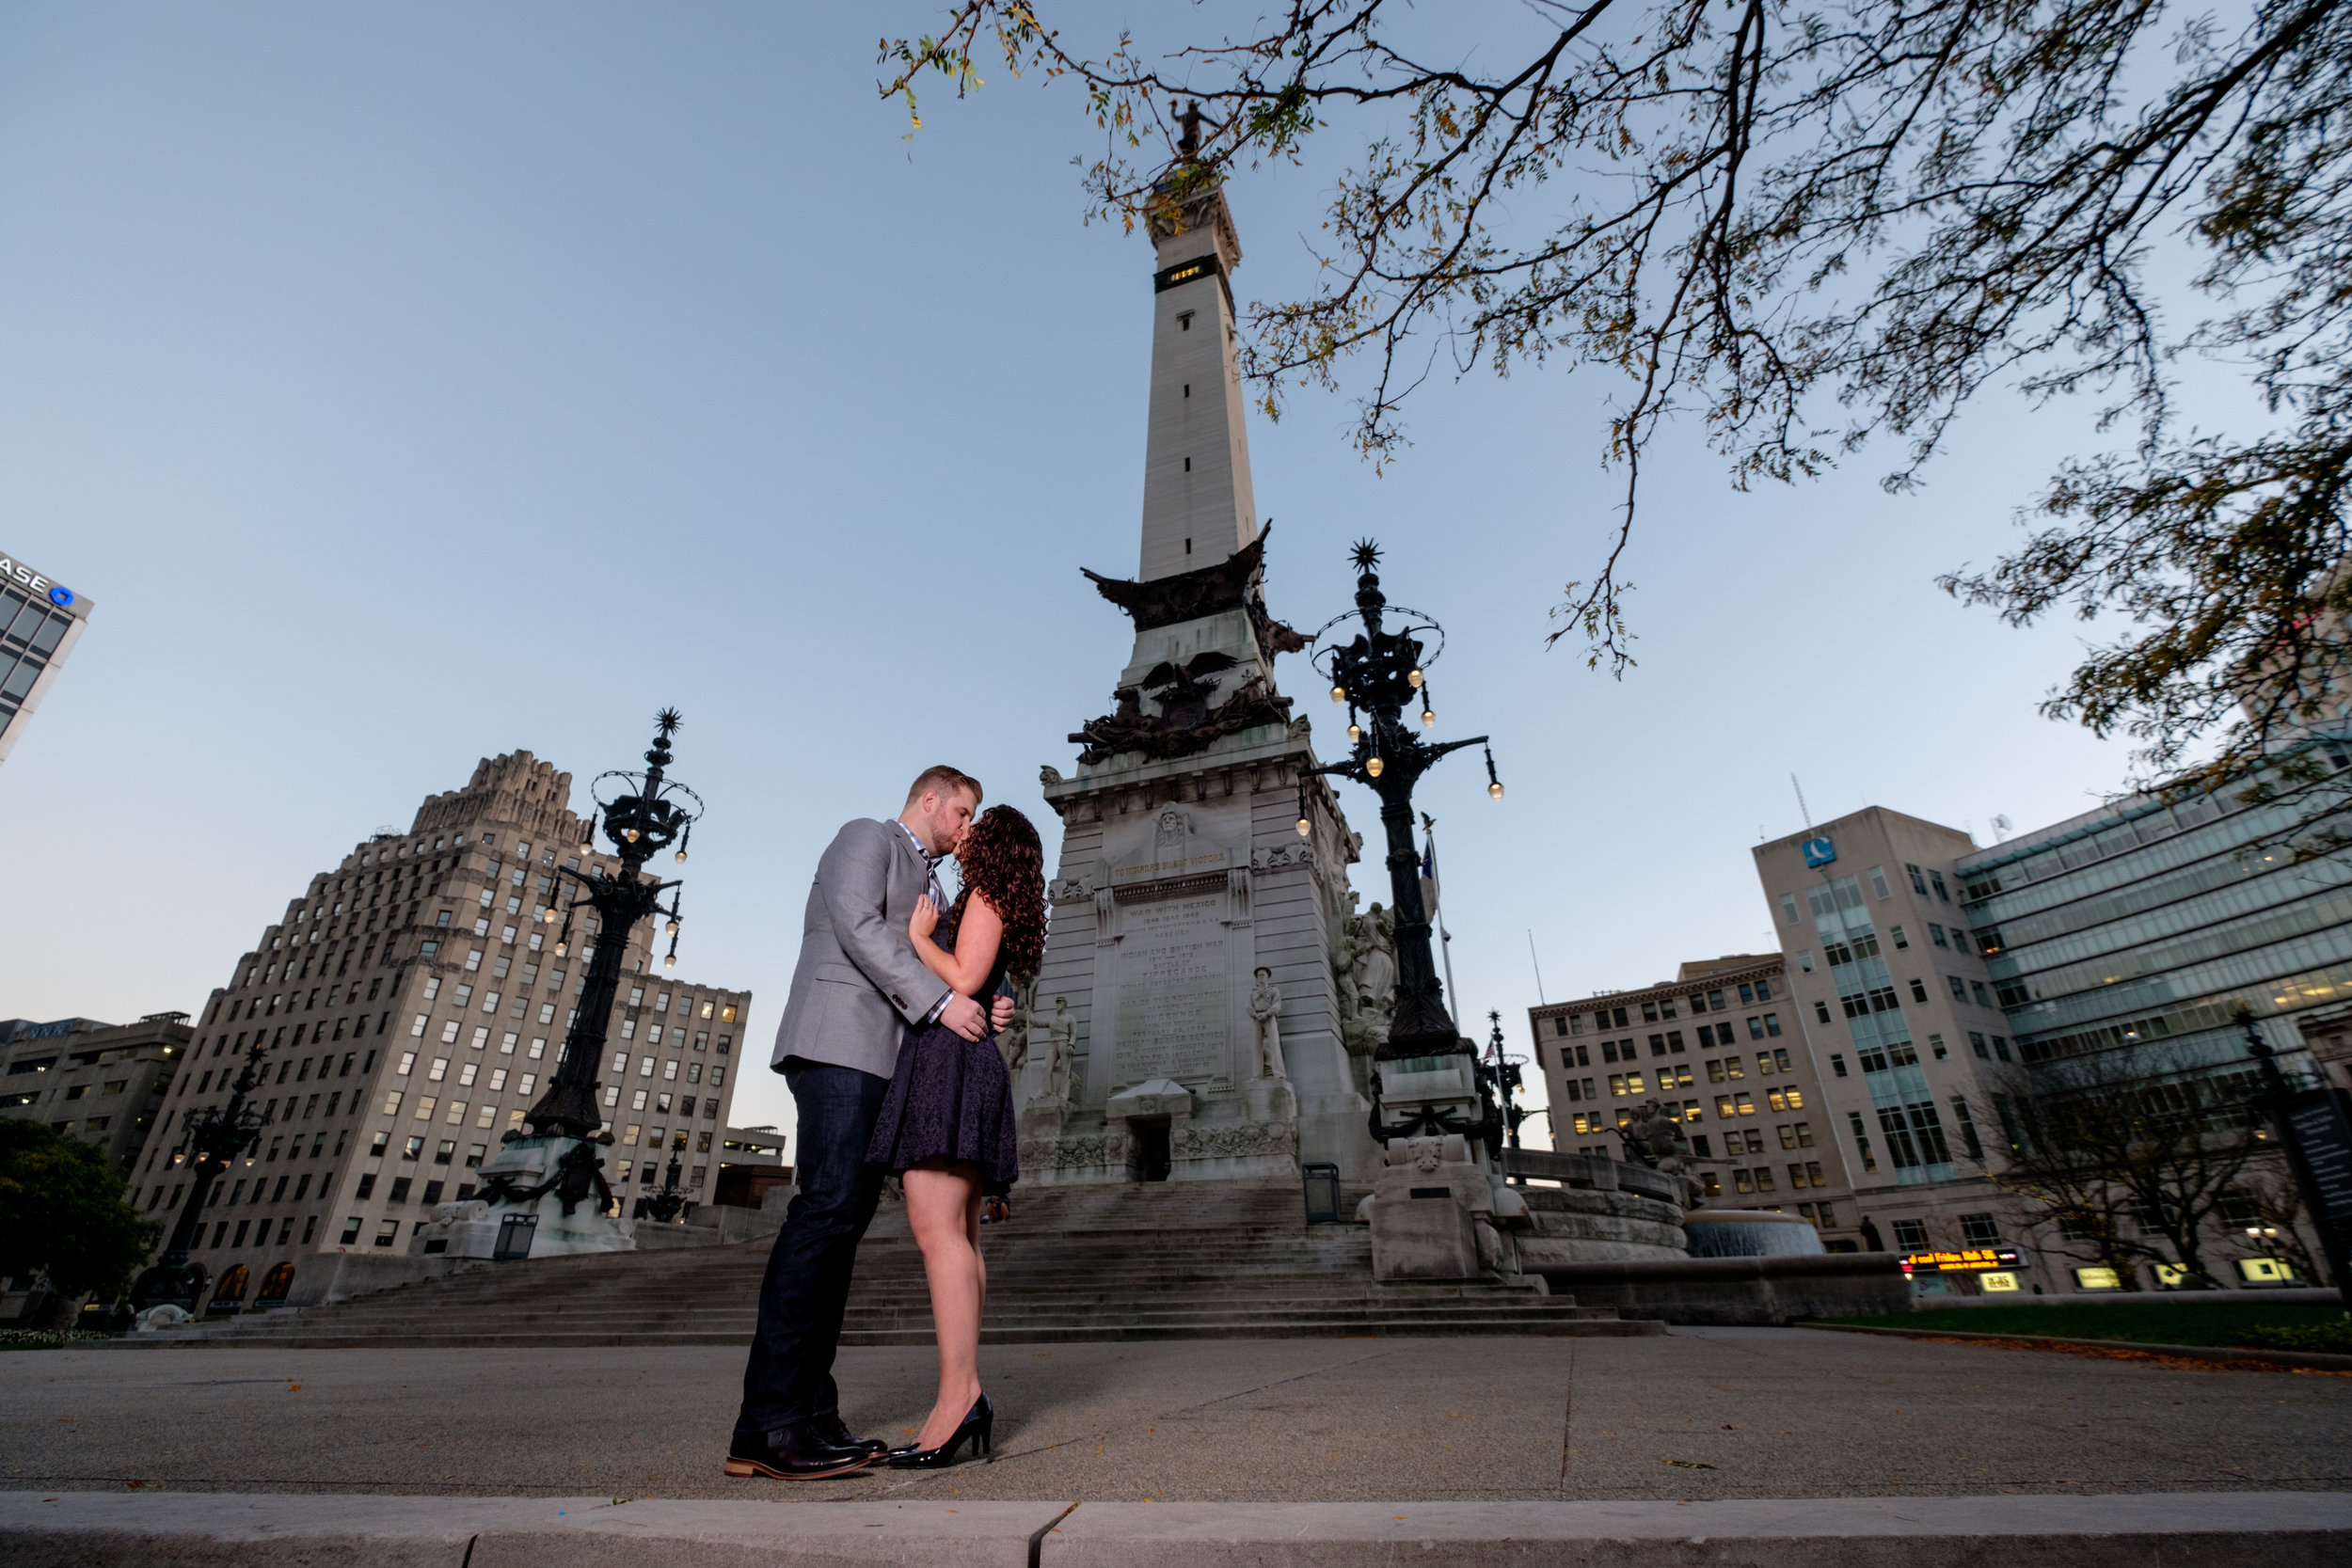 Downtown-Indianapolis-night-engagement-pictures-02.jpg